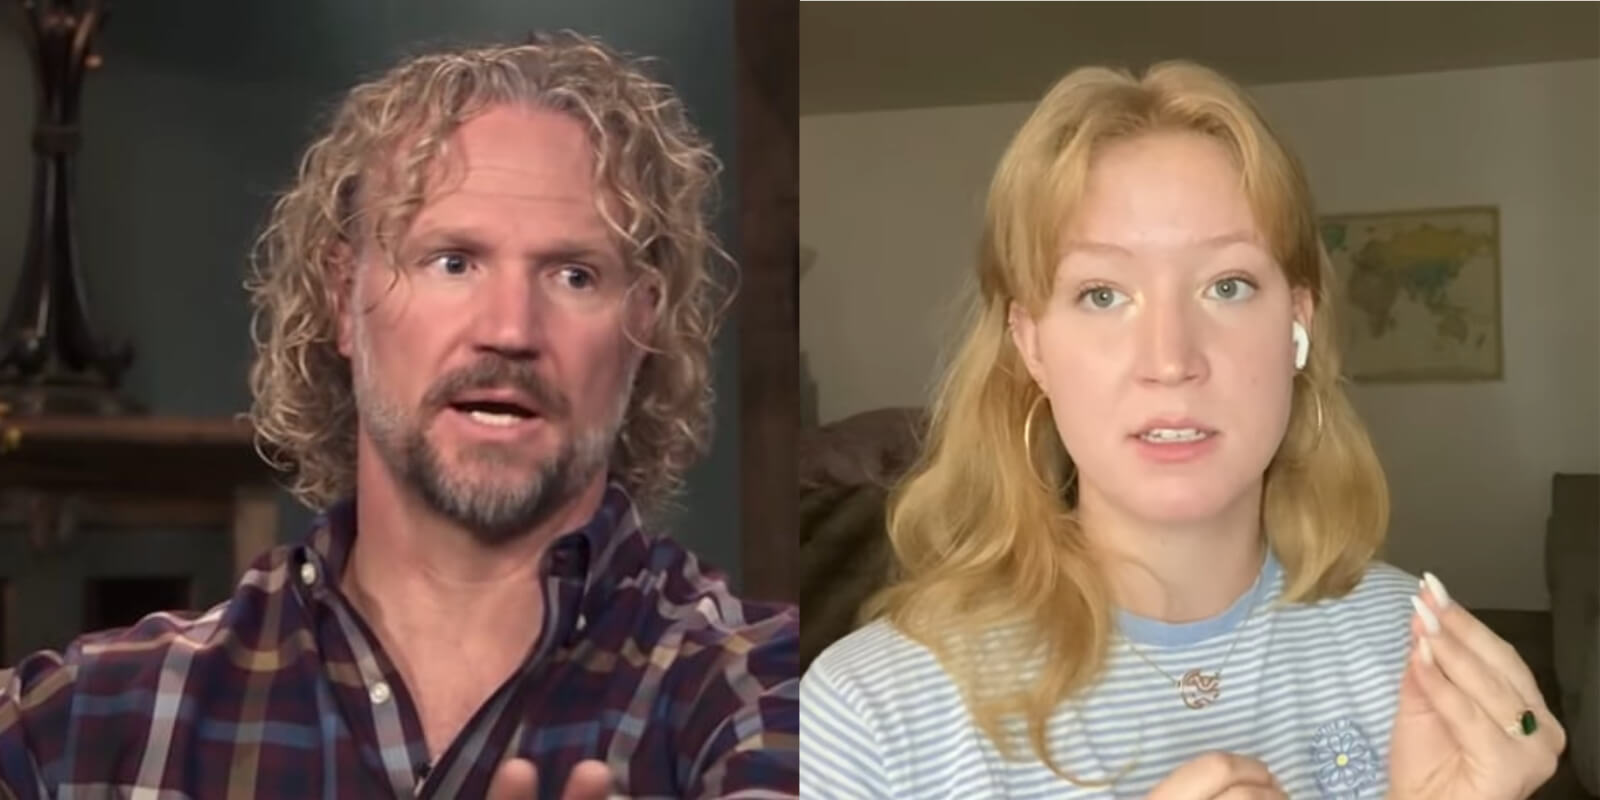 Kody Brown and his daughter Gwendlyn Brown in side by side photographs from 'Sister Wives' and YouTube.